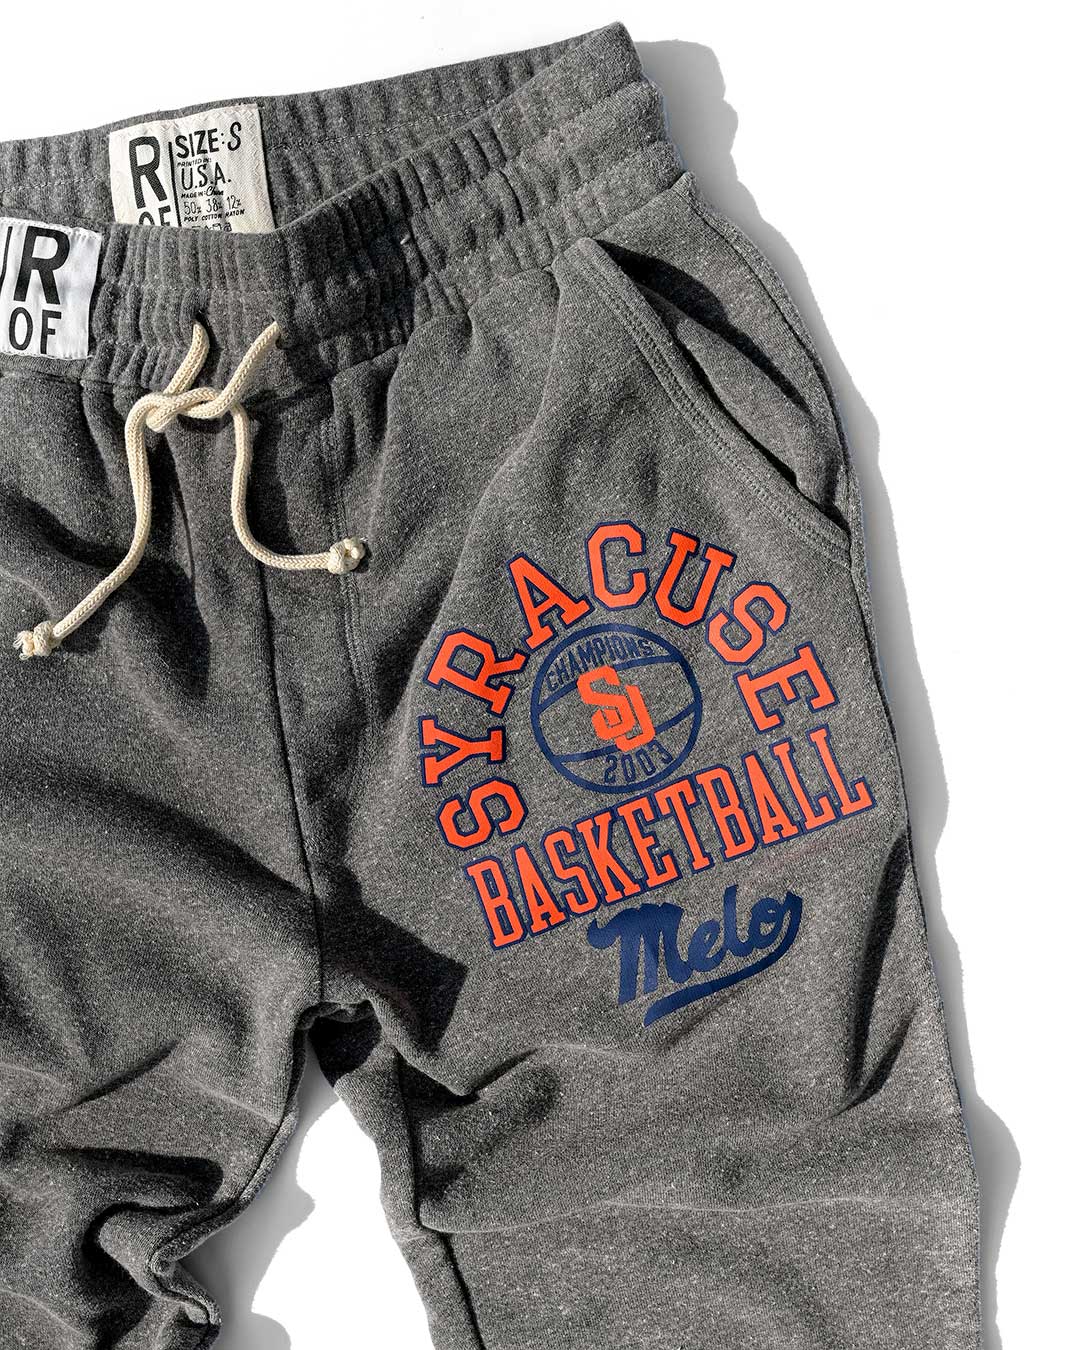 Melo Syracuse Grey Sweatpants - Roots of Fight